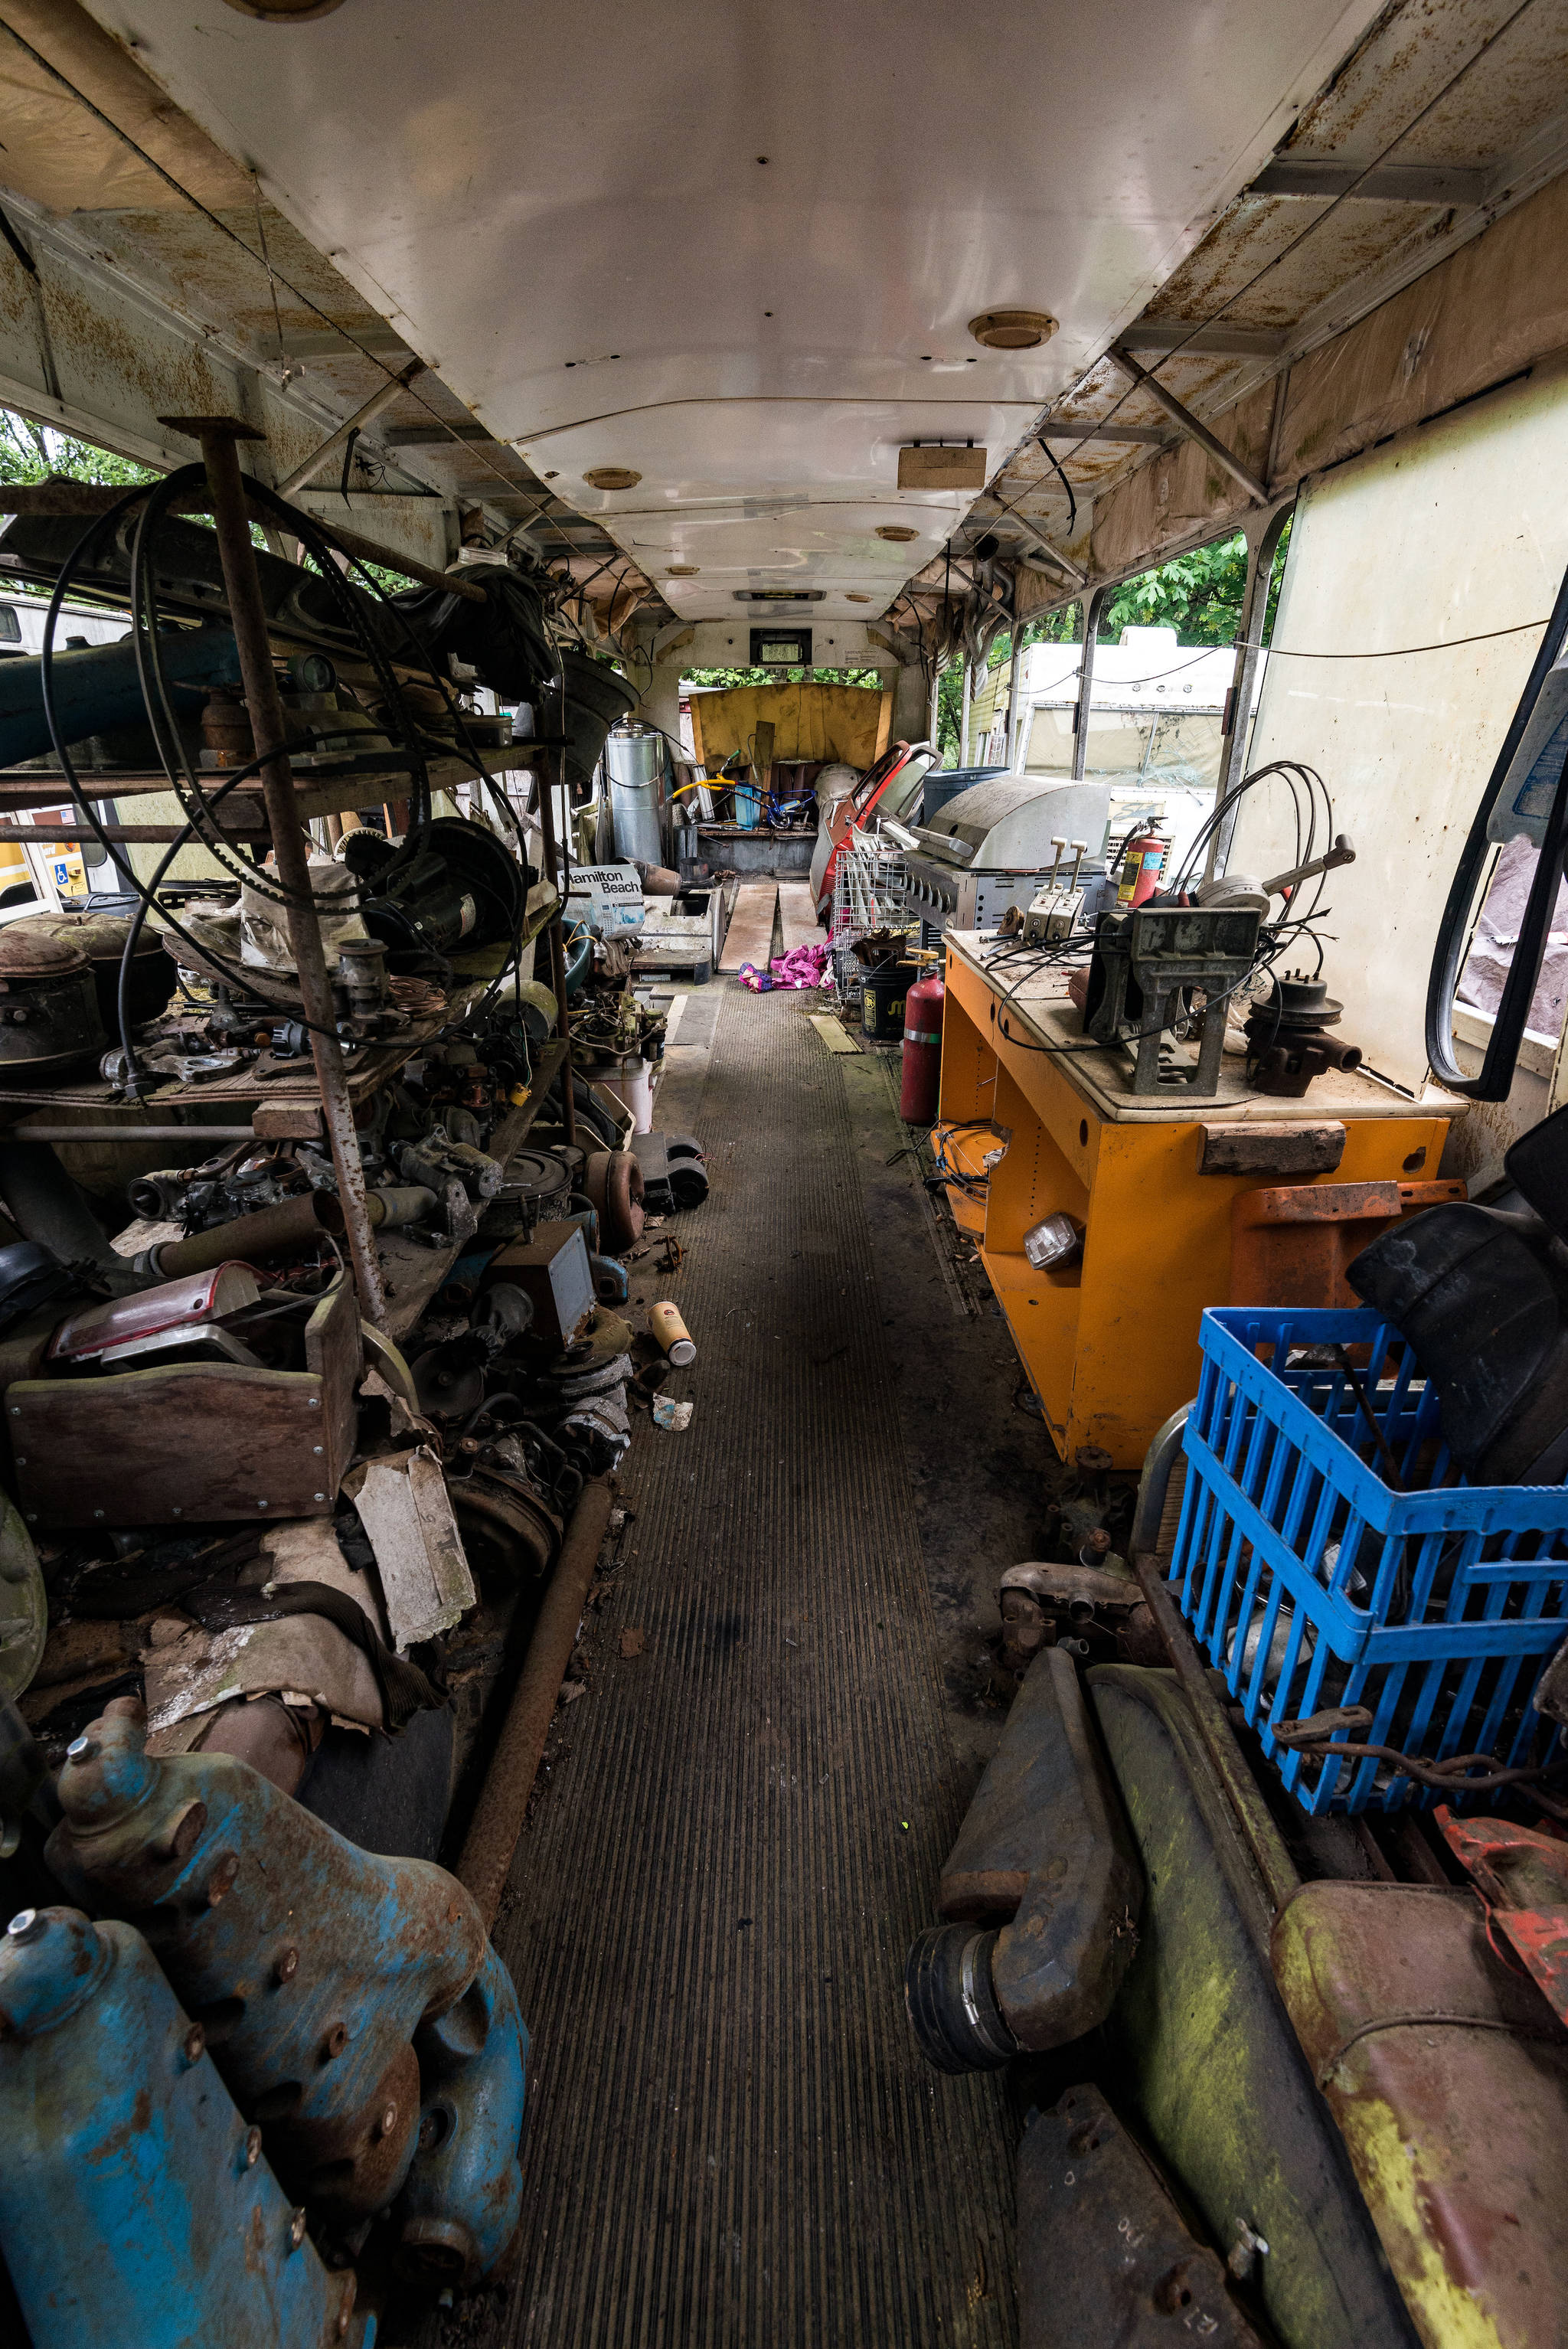 The interior of one of the several buses found on Pillon’s property. The buses in the illegal junkyard are often used as storage for other artifacts found in the rubble. Photo by Caean Couto